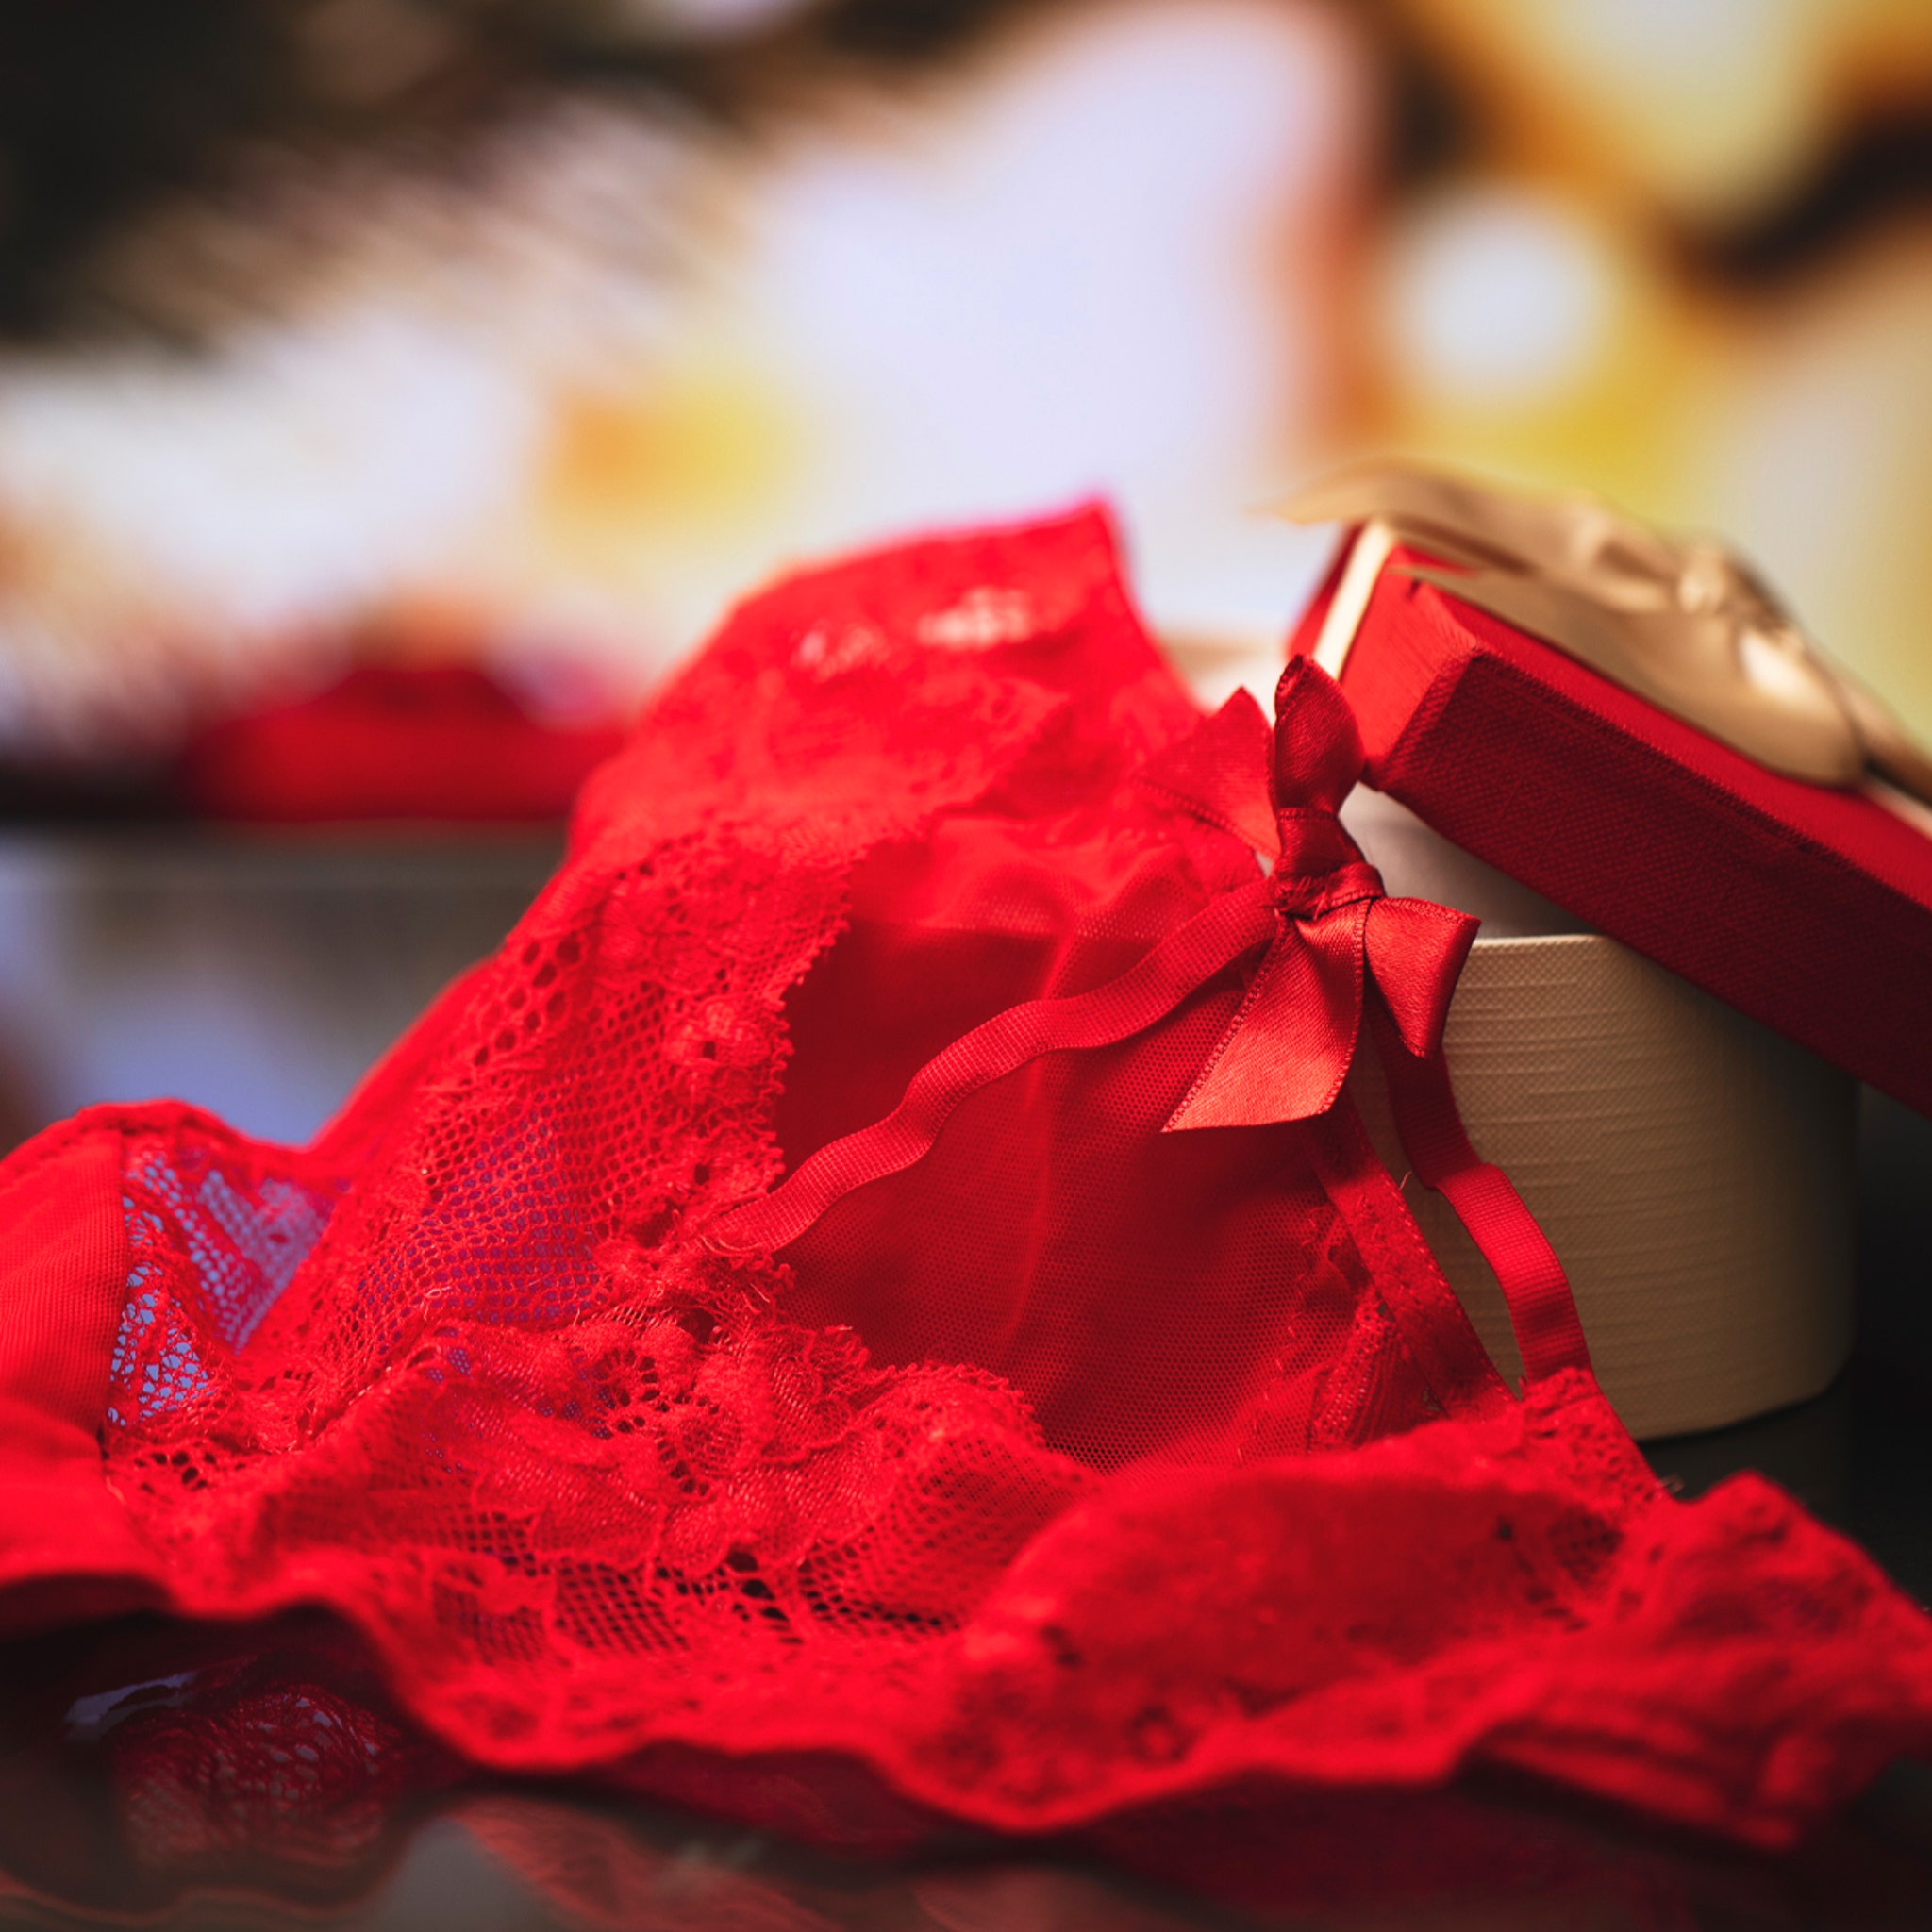 Teen Dad Gets Overwhelming Support For Buying Daughter 'Revealing' Lingerie  For Christmas